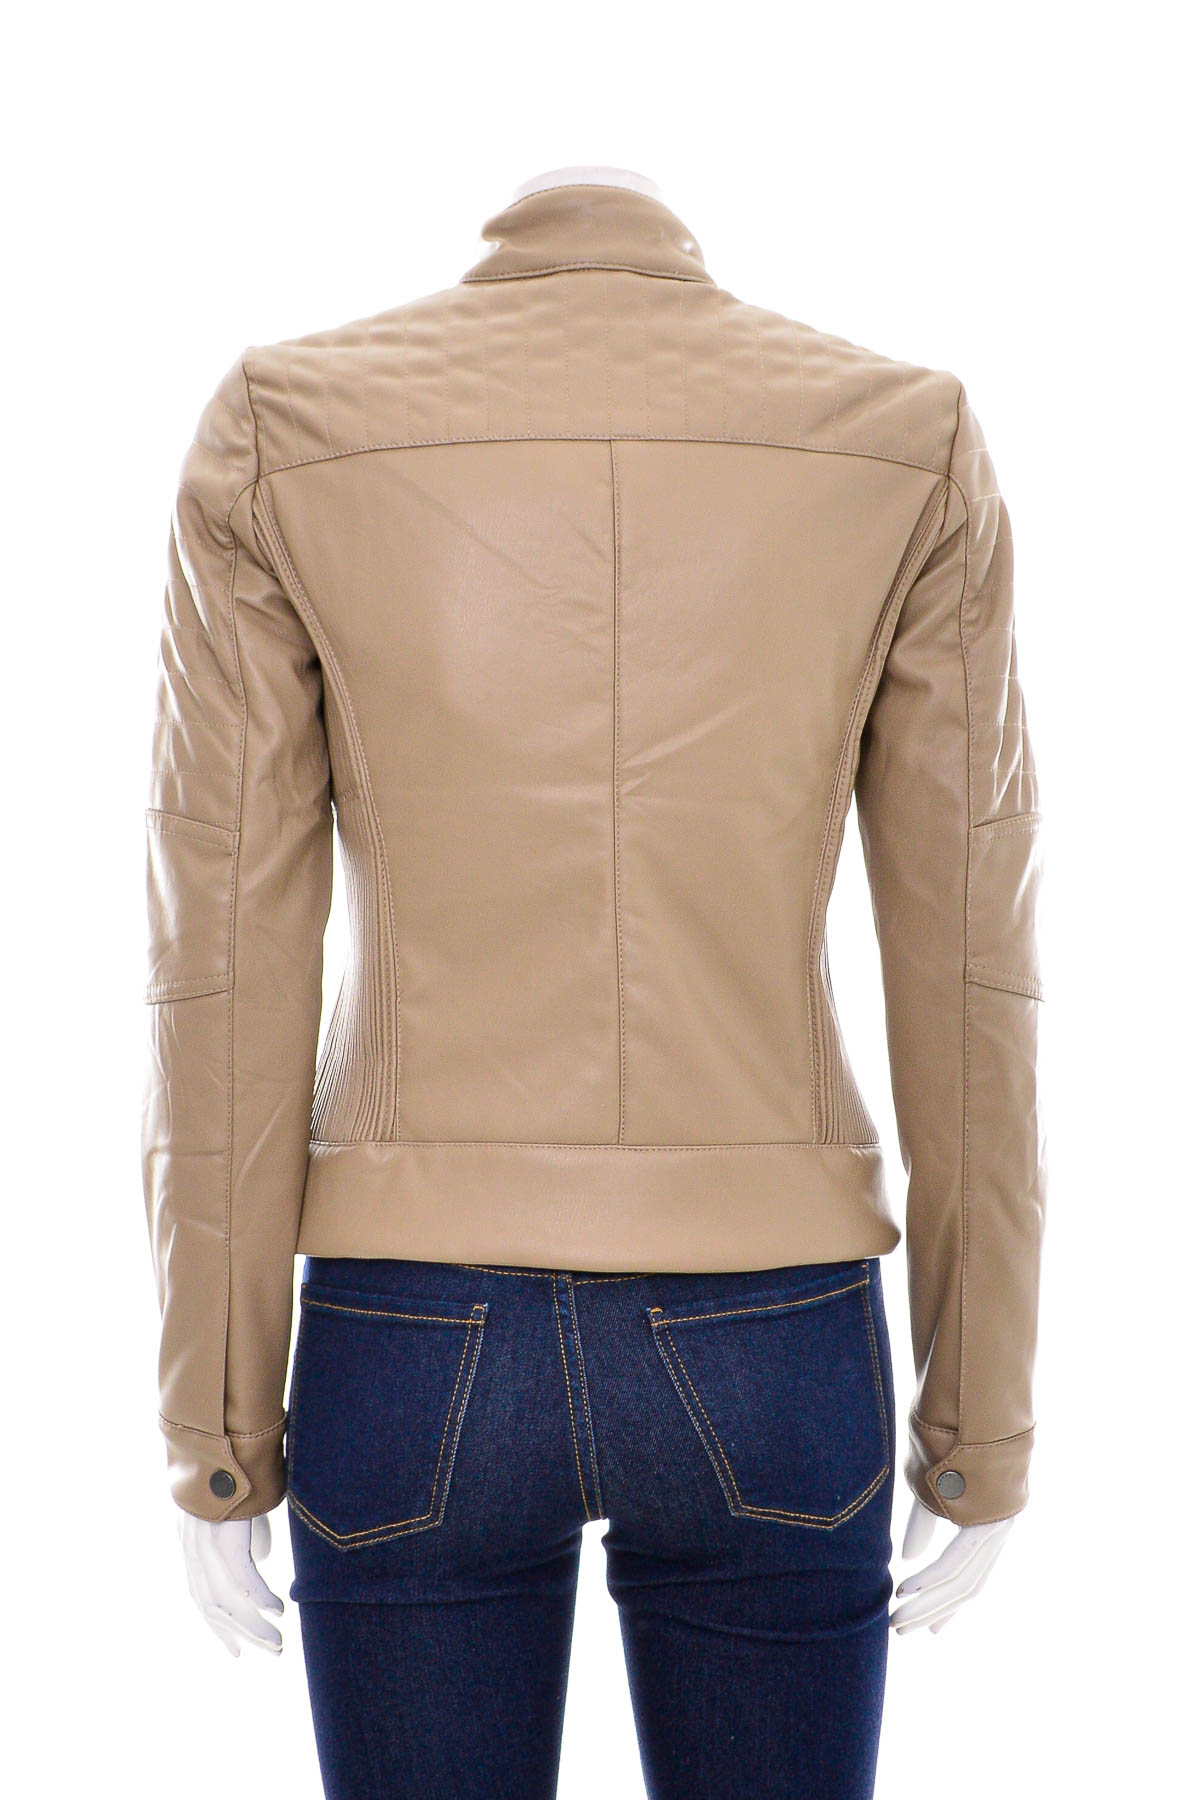 Women's leather jacket - GUESS - 1